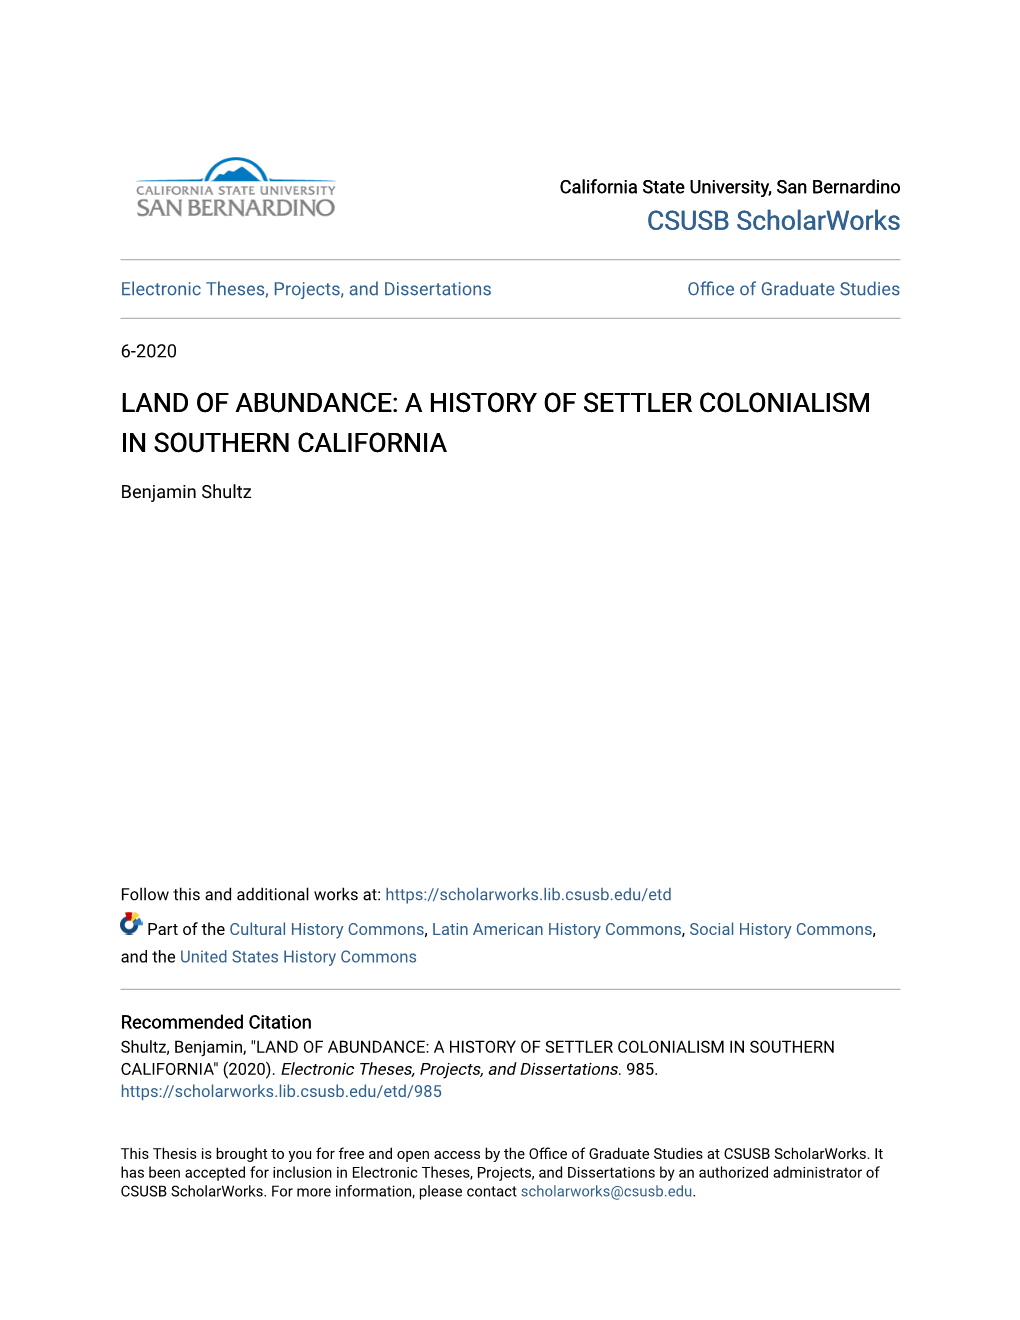 Land of Abundance: a History of Settler Colonialism in Southern California